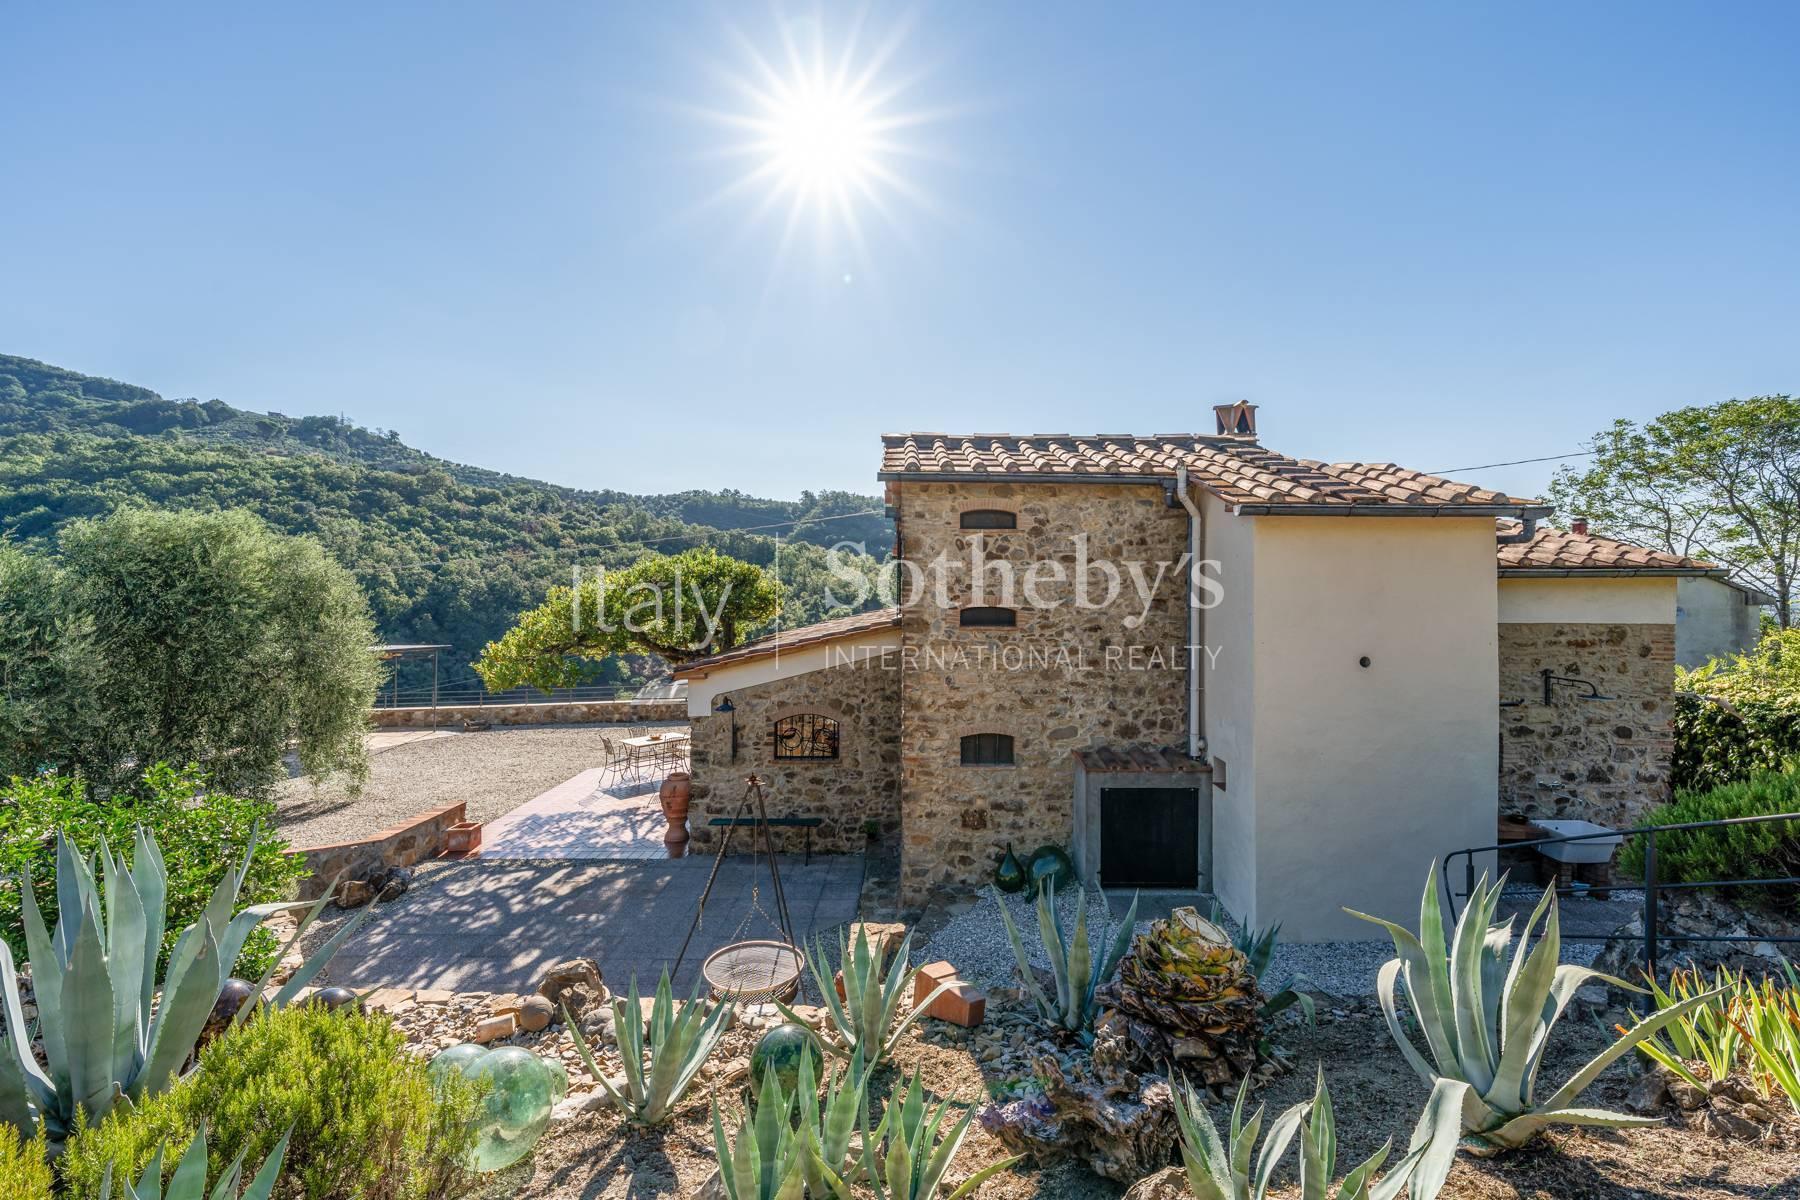 One-of-a-kind Tuscan cottage on the hills between Lucca and Montecatini Terme - 3